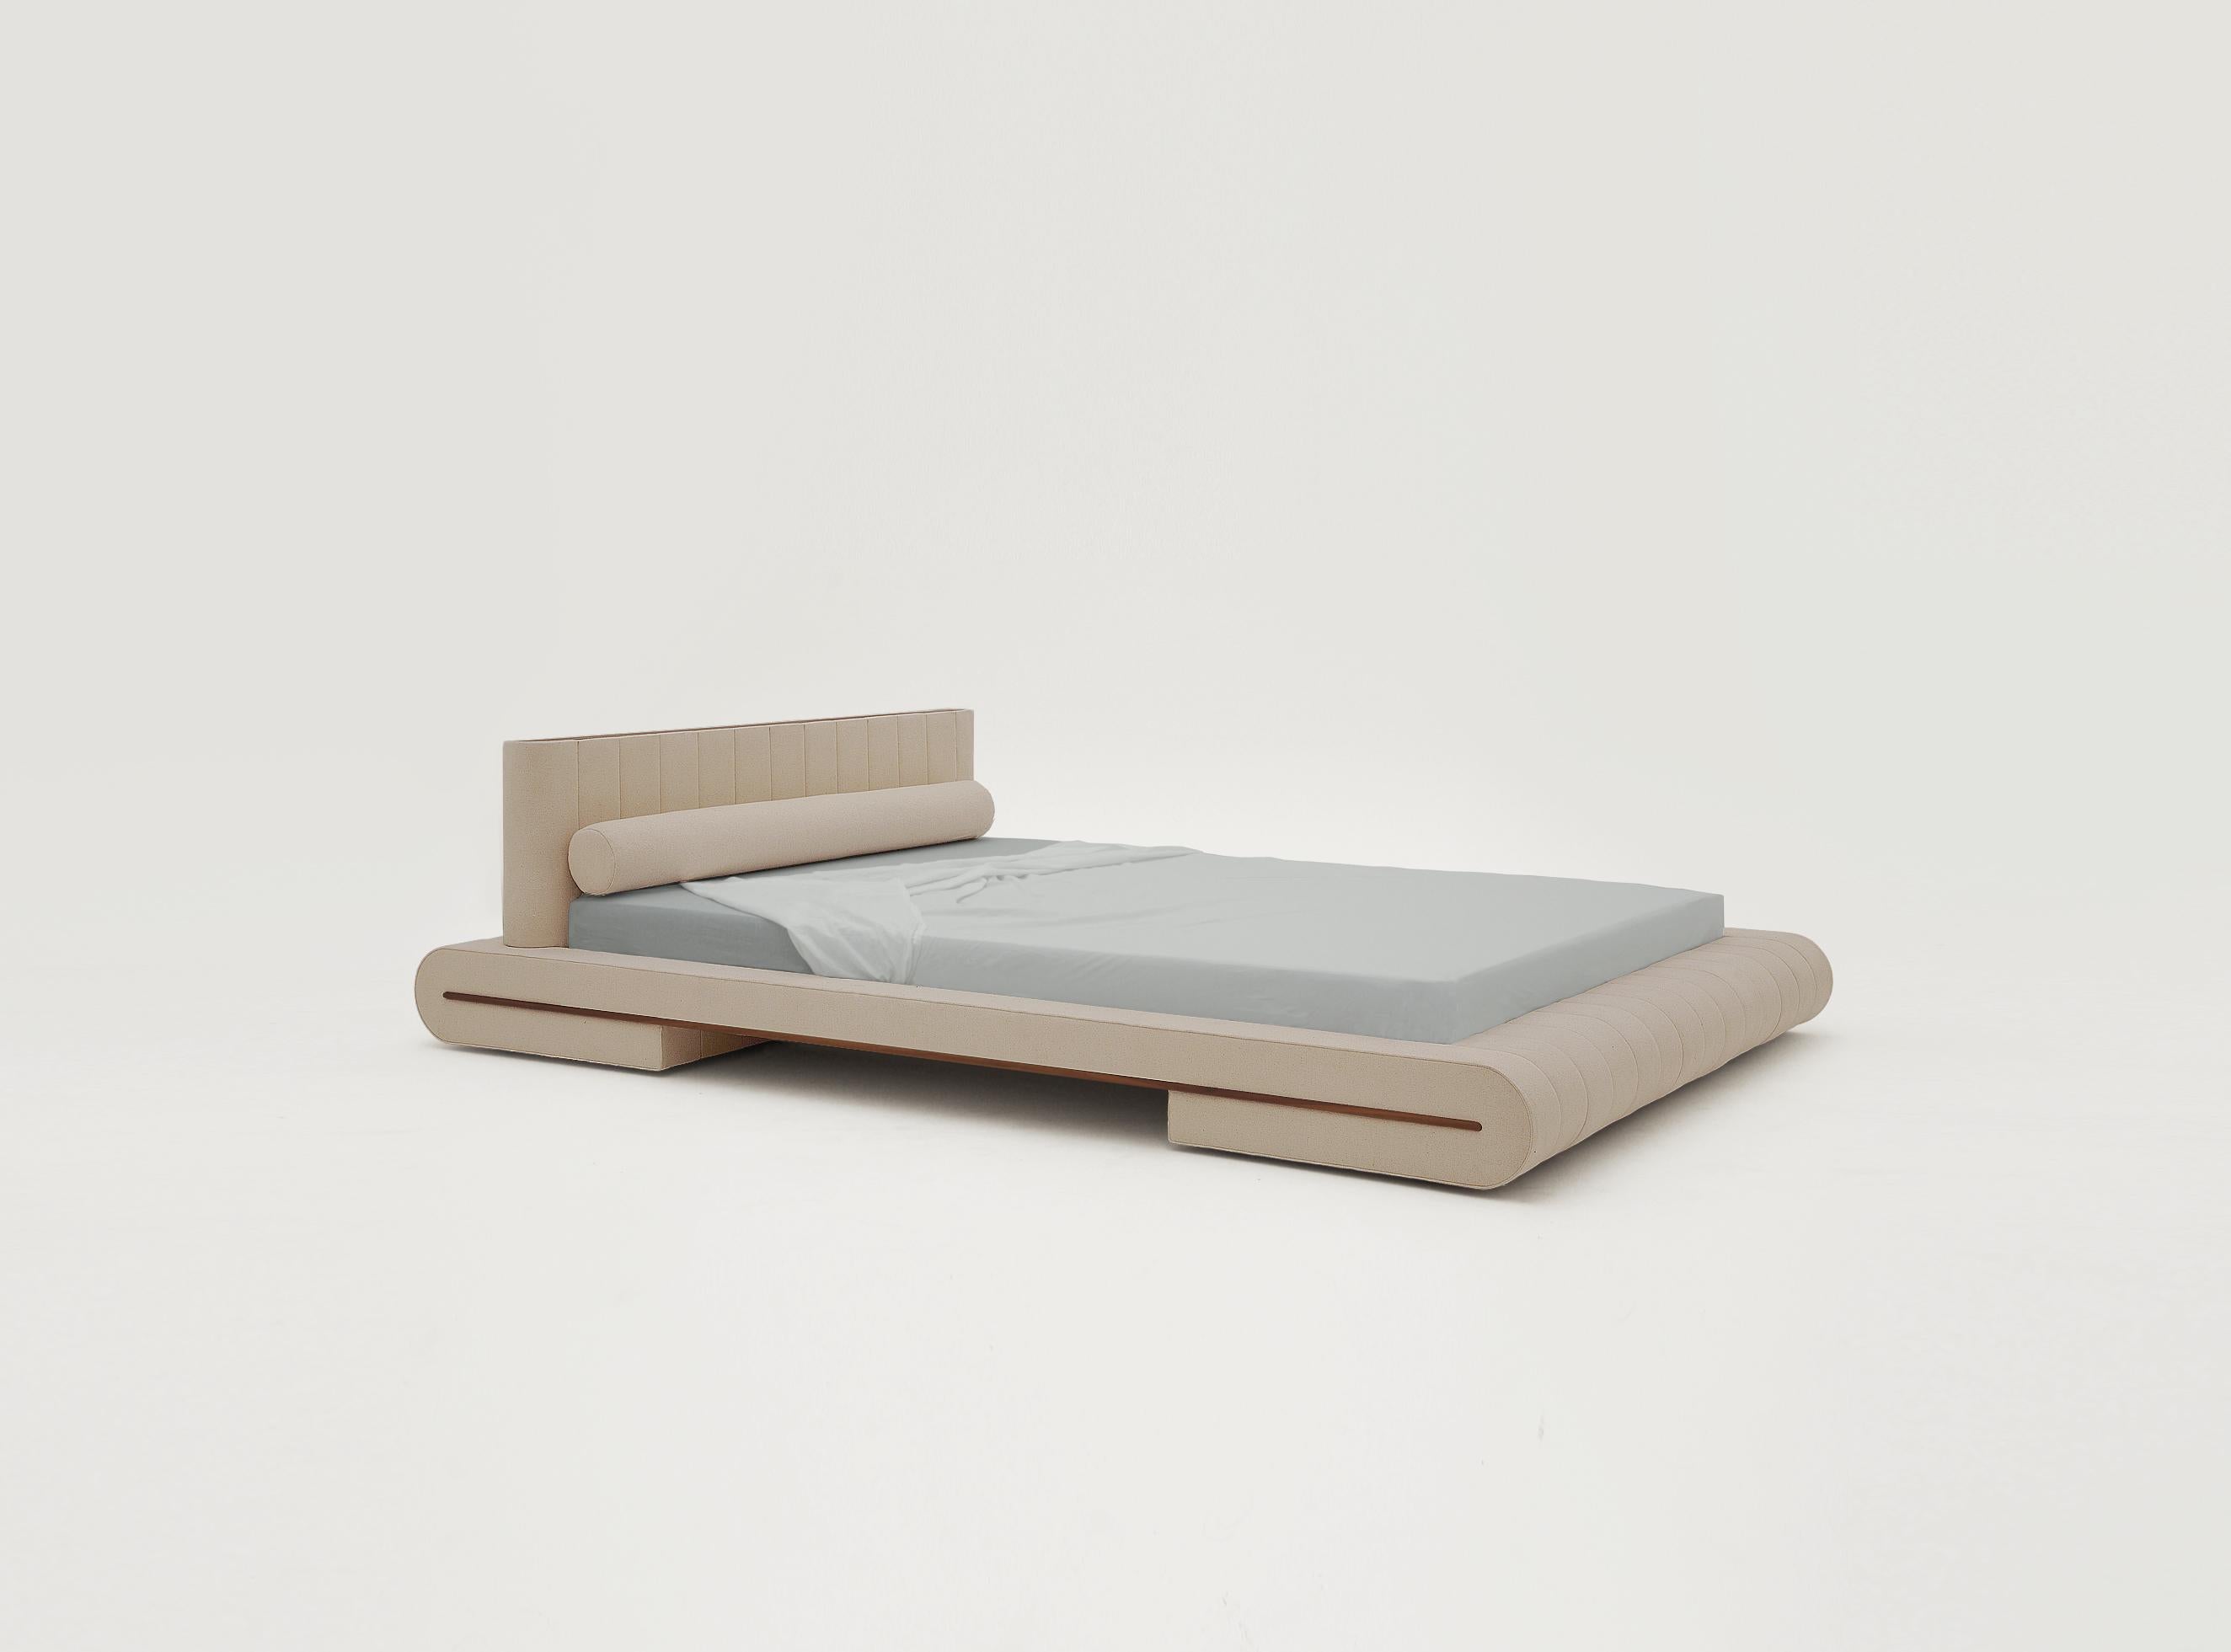 Docked en Rio has a fully upholstered bed frame. The cotton weave is stretched around a folded mattress frame inspired by traditional Japanese furniture. The form is composed of modular cross-sections with a walnut rail that accentuates the folding